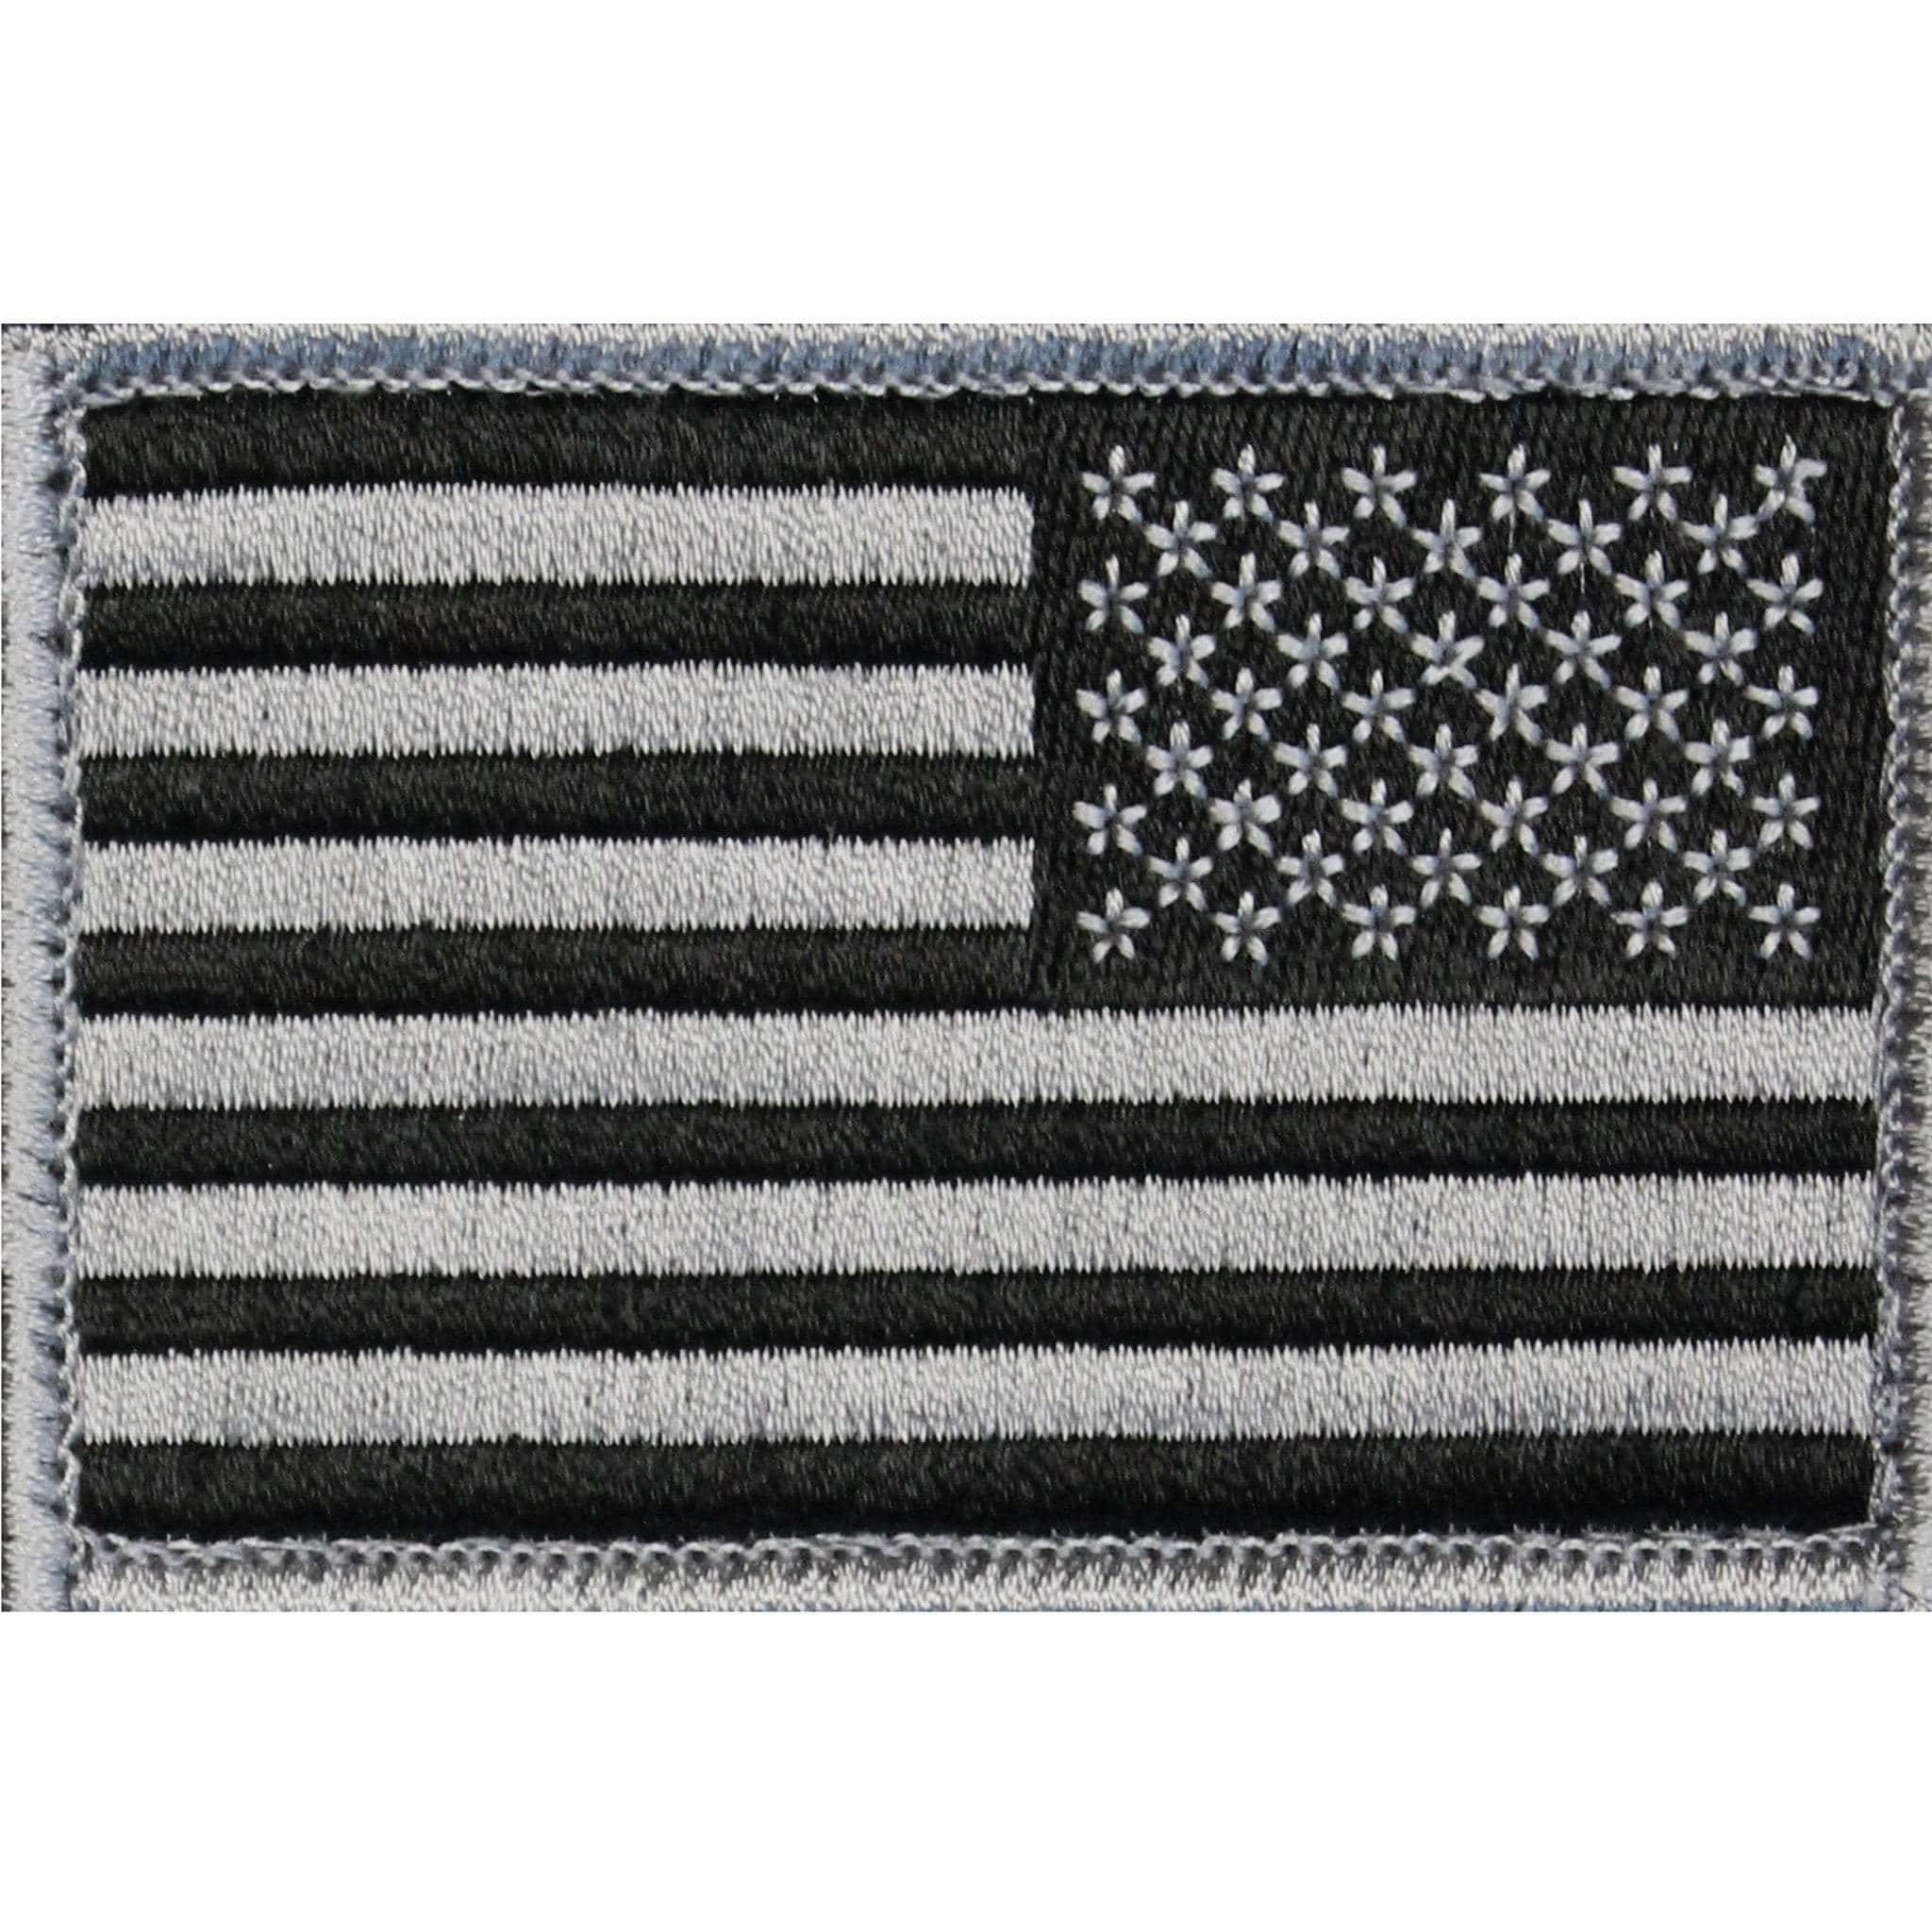 American Flag Patch with Velcro Backing